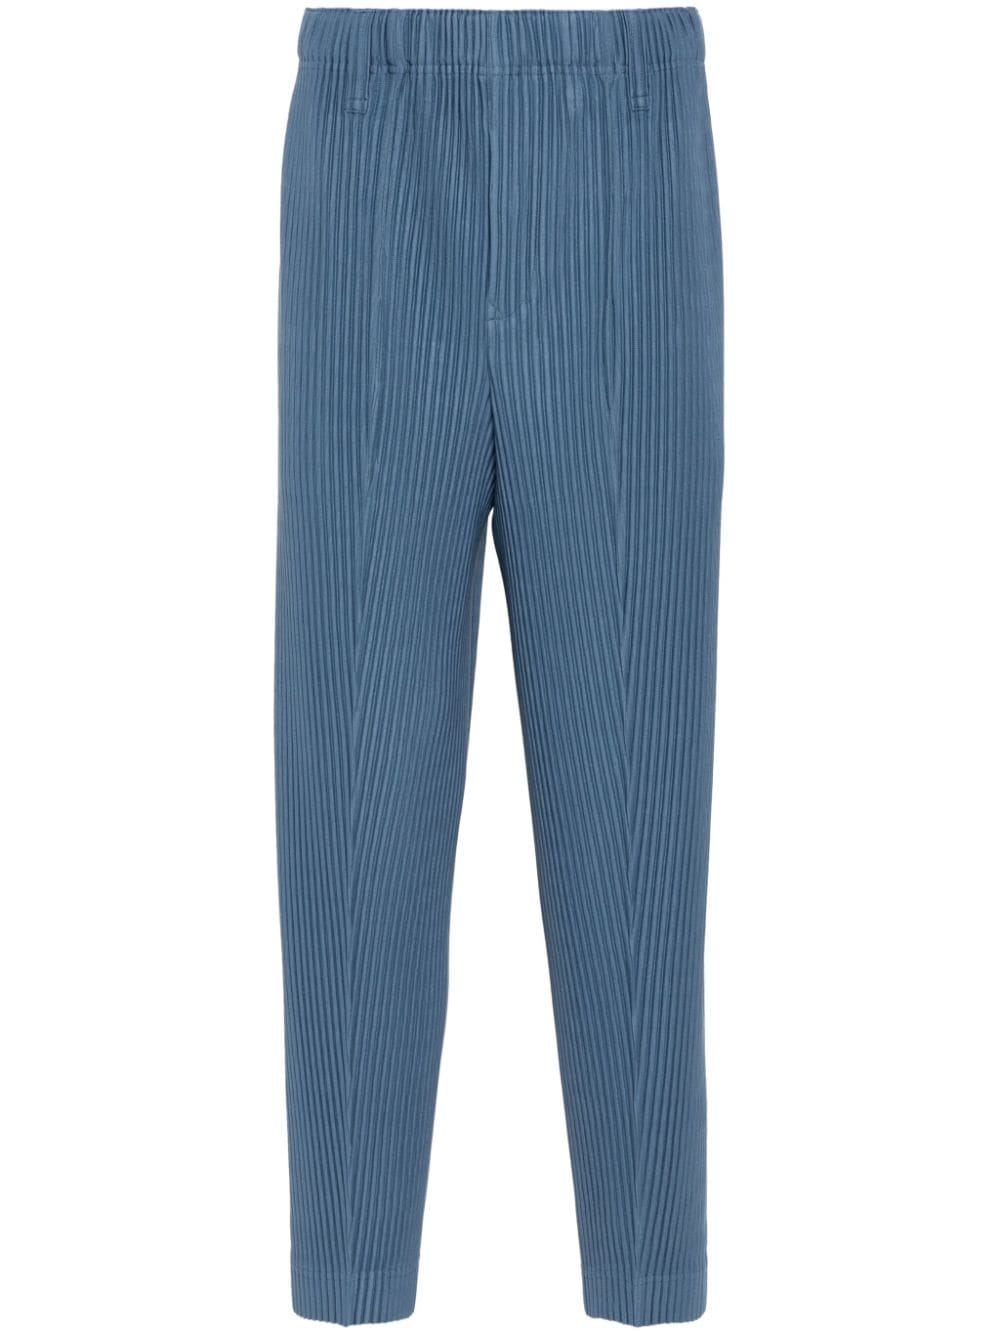 Homme Plissé Issey Miyake Compleat pleated trousers